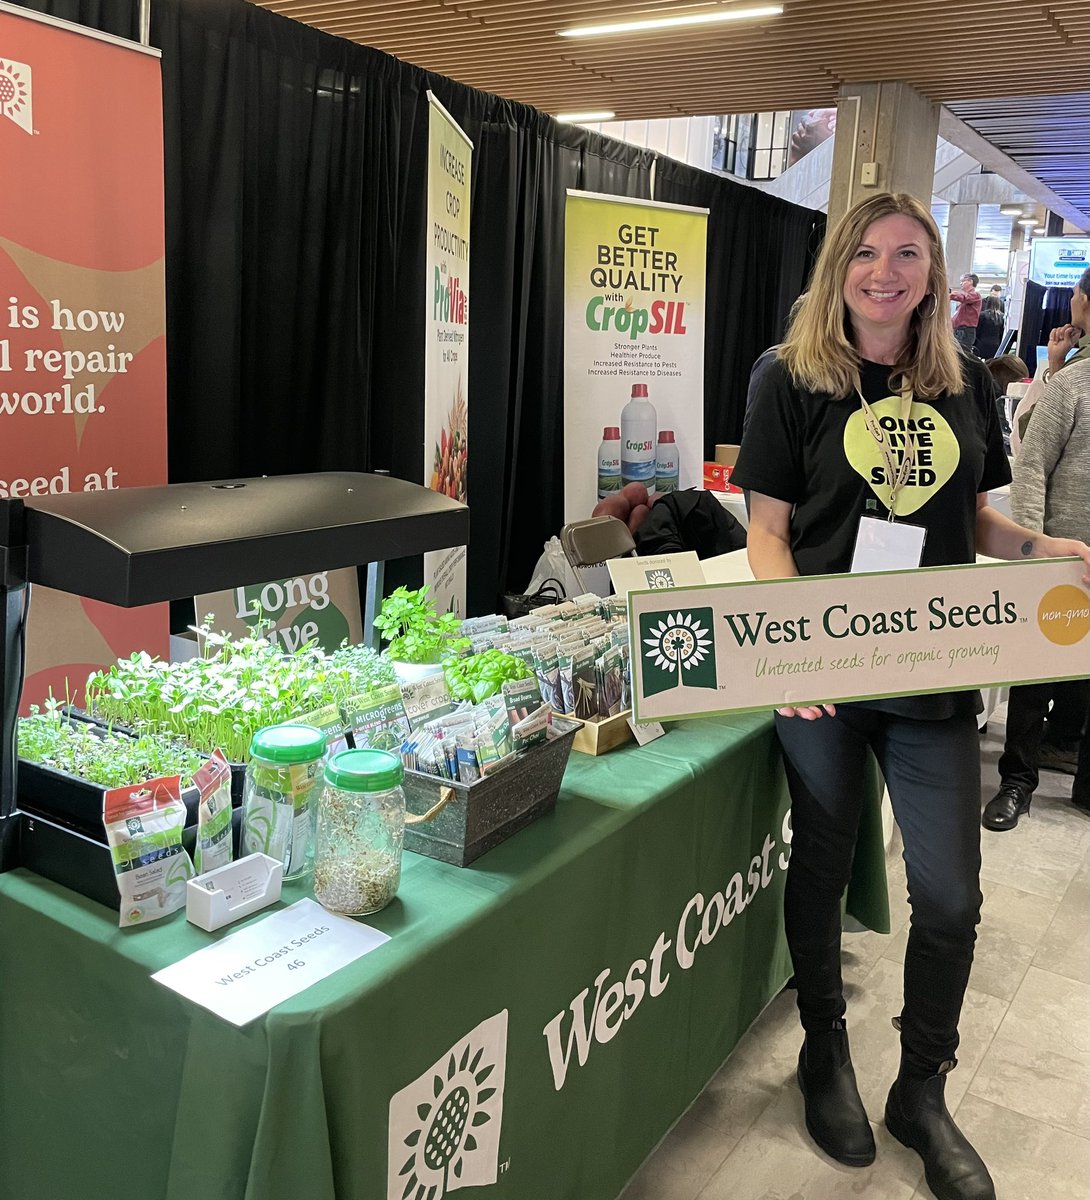 Chatting with my fellow organic minded locavores at the Organic council of Ontario’s trade show, on all weekend - FREE! #organicgrowing #growfromseed